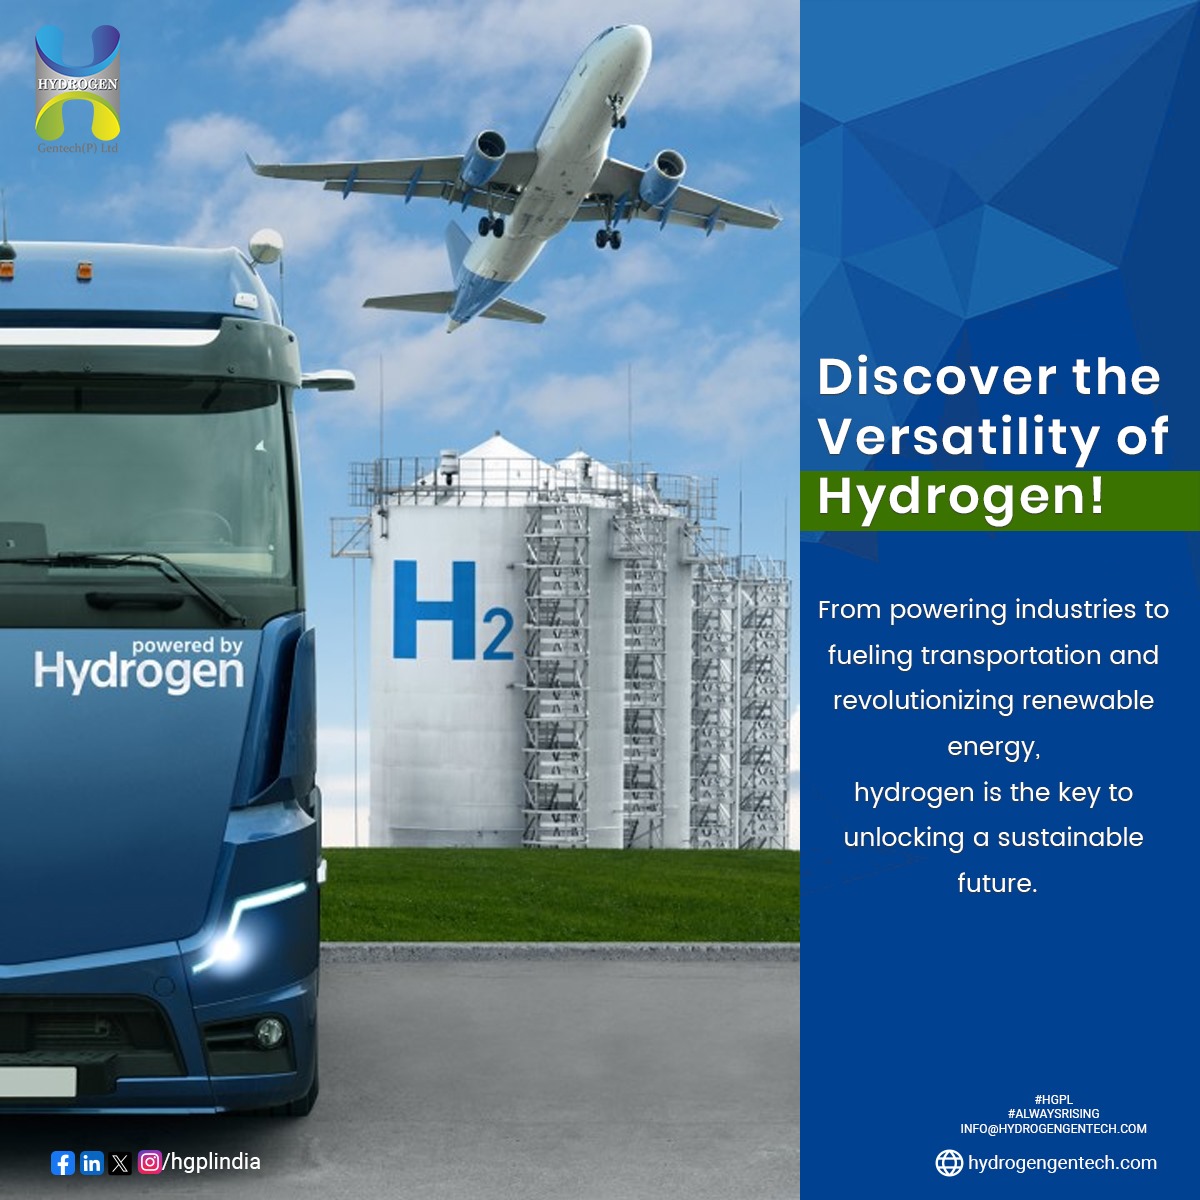 💡 From powering industries to fueling transportation and revolutionizing renewable energy, hydrogen is the key to unlocking a sustainable future. 🌱

Join us in embracing the boundless potential of hydrogen across various sectors! 💚

#HydrogenRevolution #SustainableFuture 🌍💧